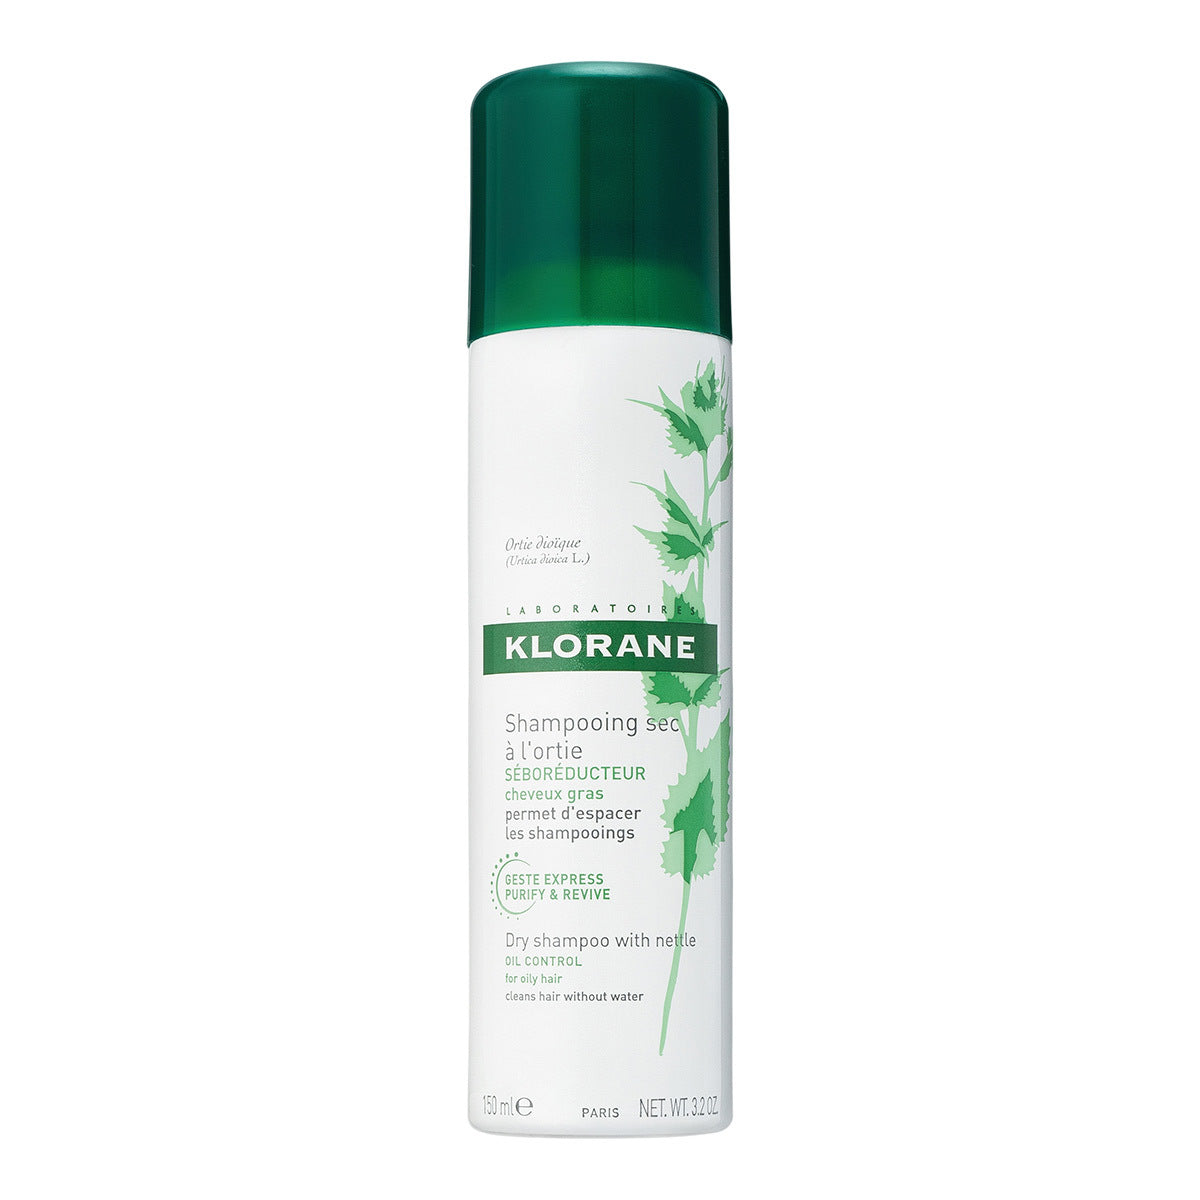 Primary image of Dry Shampoo for Oily Hair with Nettle